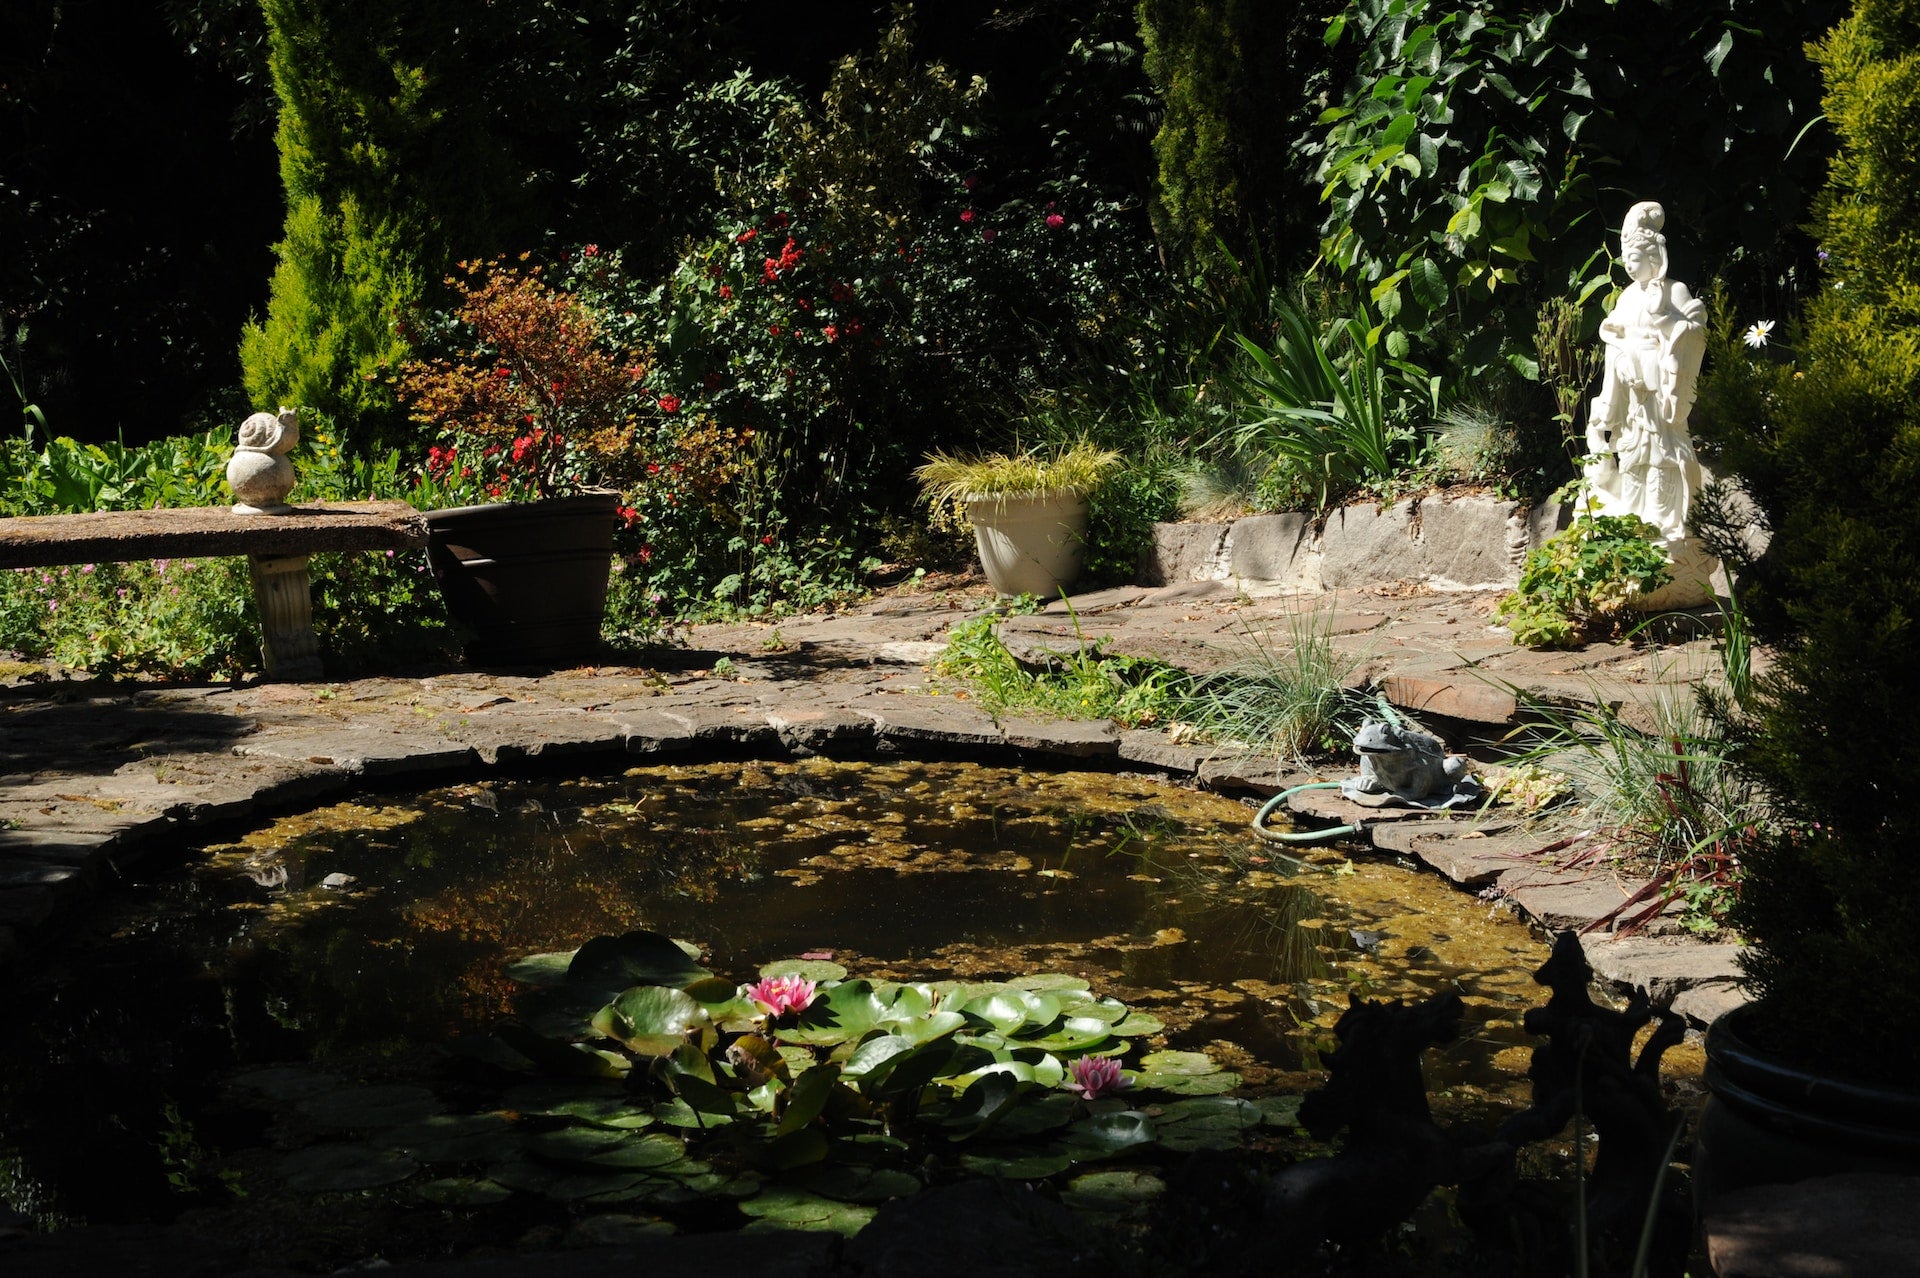 Circular garden pond with lotus flowers surrounded by foliage and garden statue